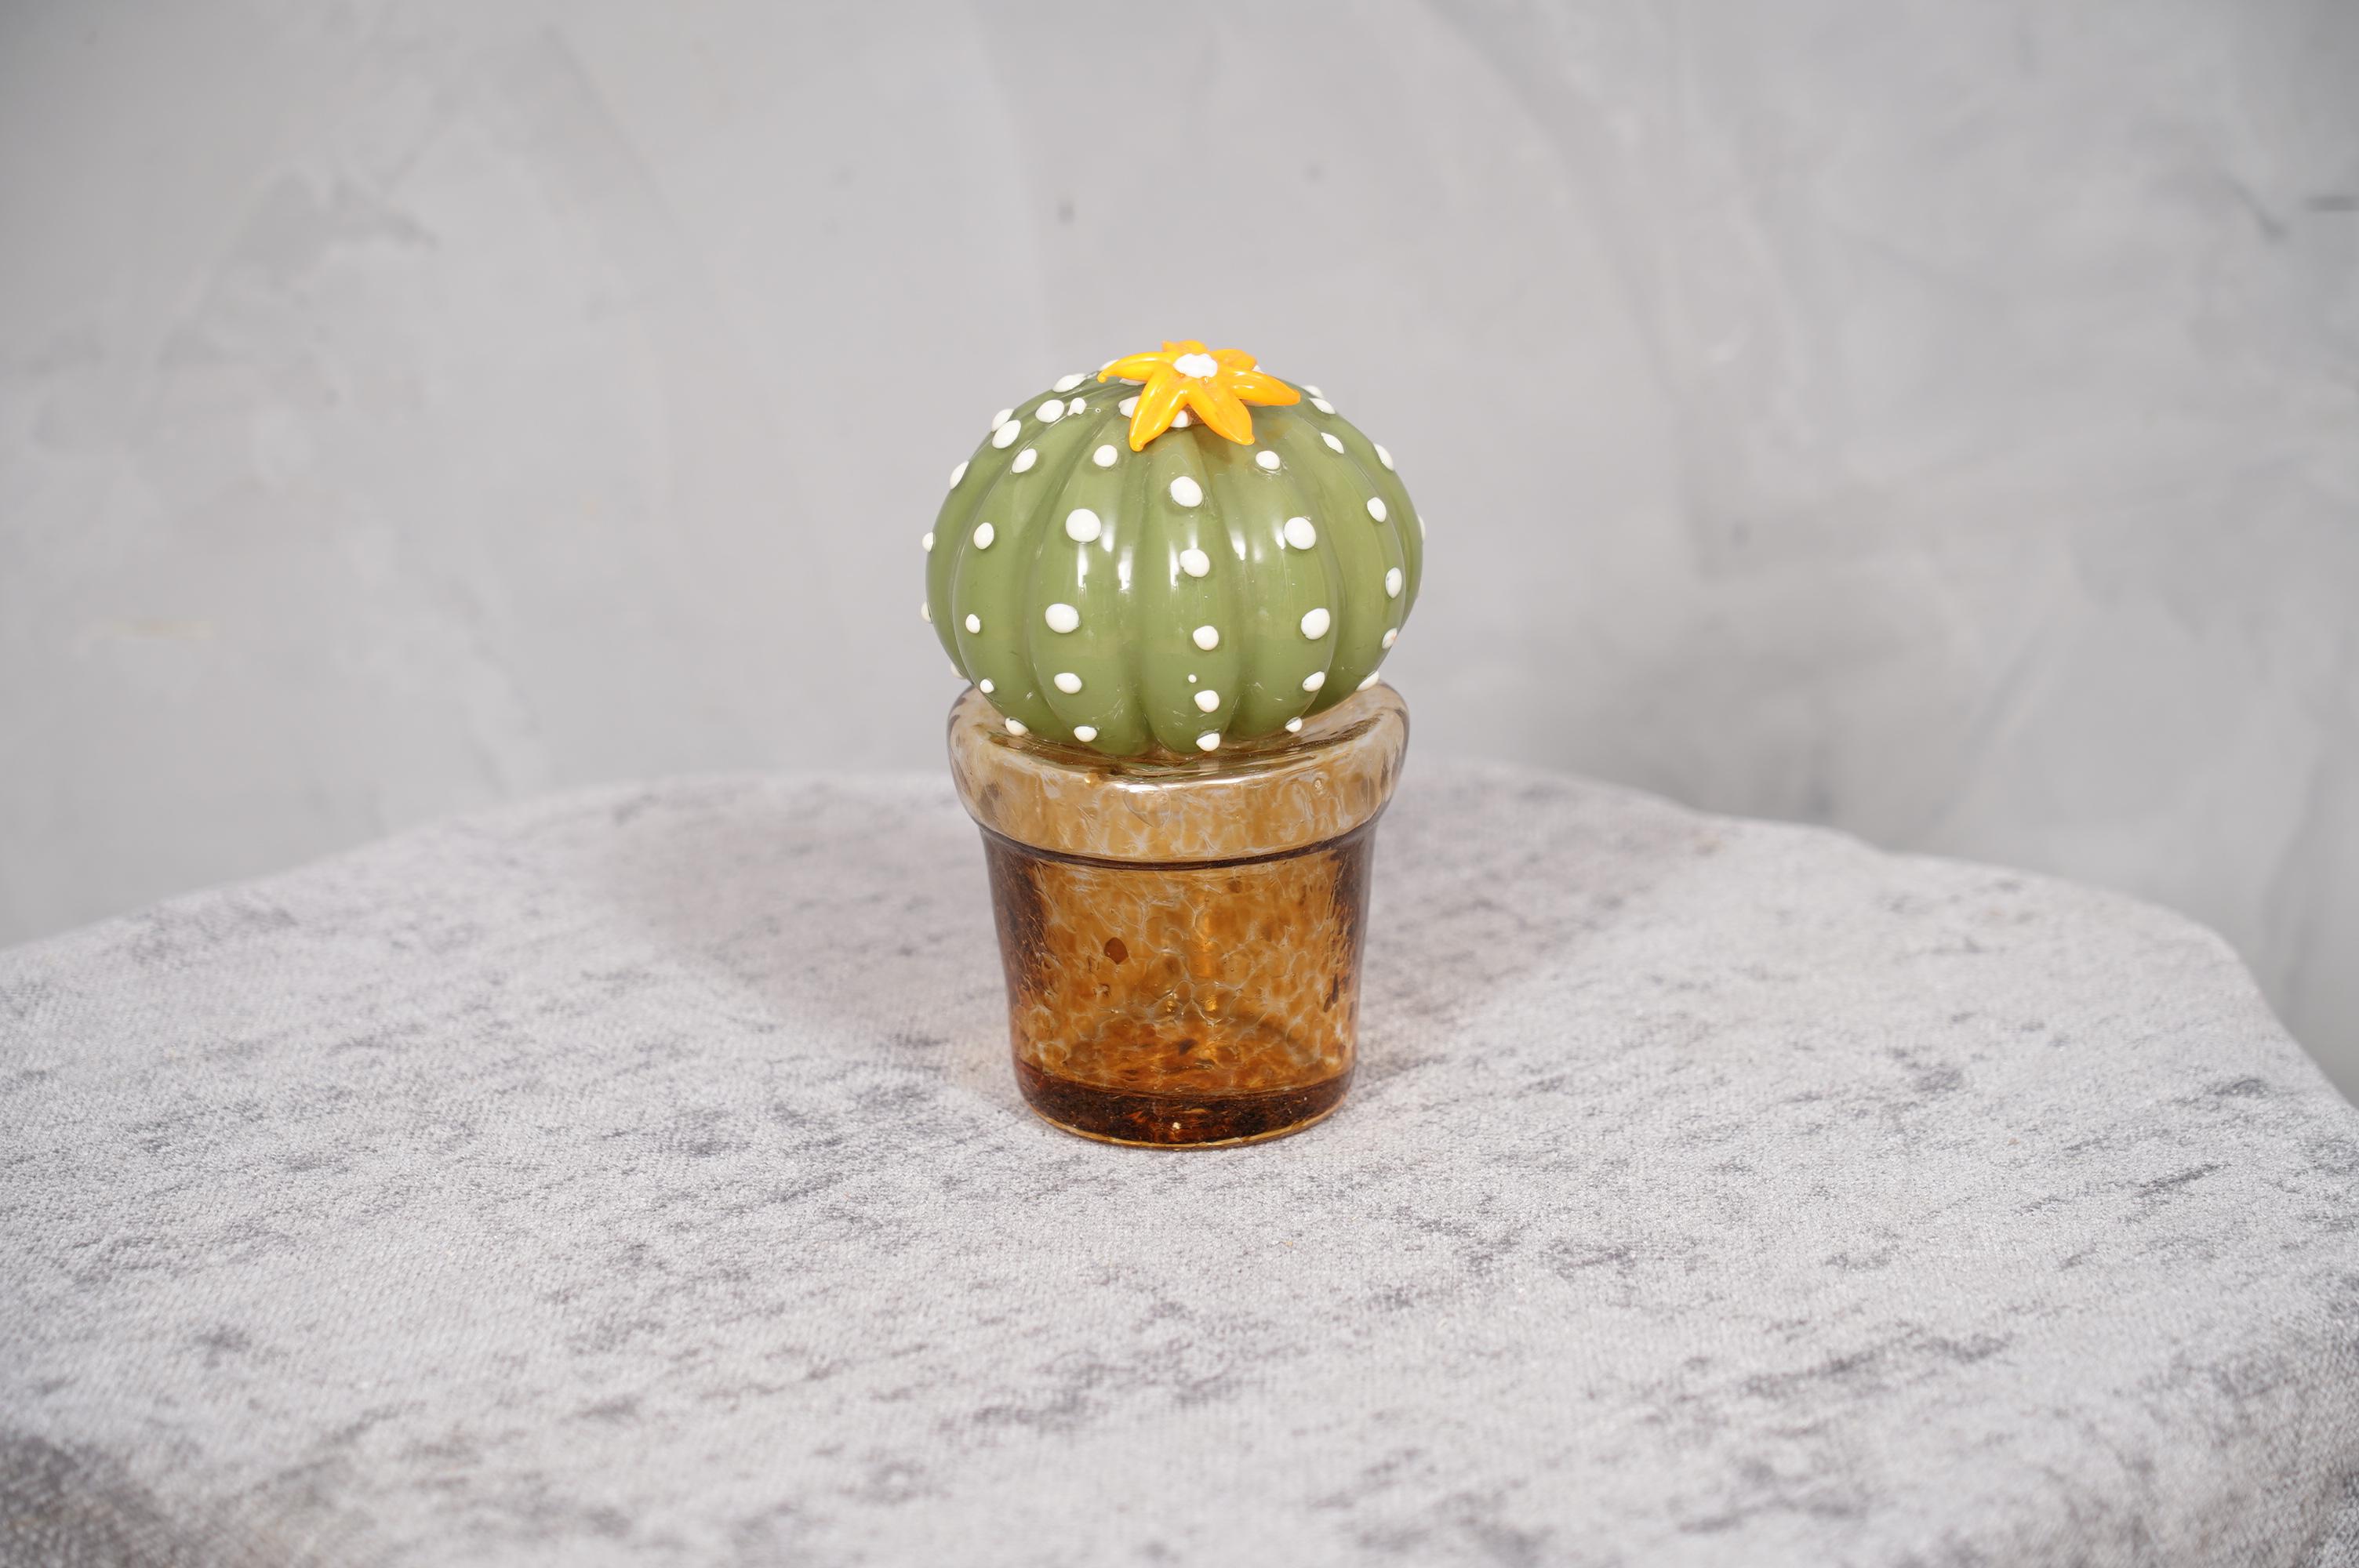 Italian design, this cactus is a fashion icon of the Italian style, green with a beautiful amber glass vase underneath.

In limited edition, manufactured in one of the furnaces in Venice, the cacti are in Murano glass have a vase in amber glass and